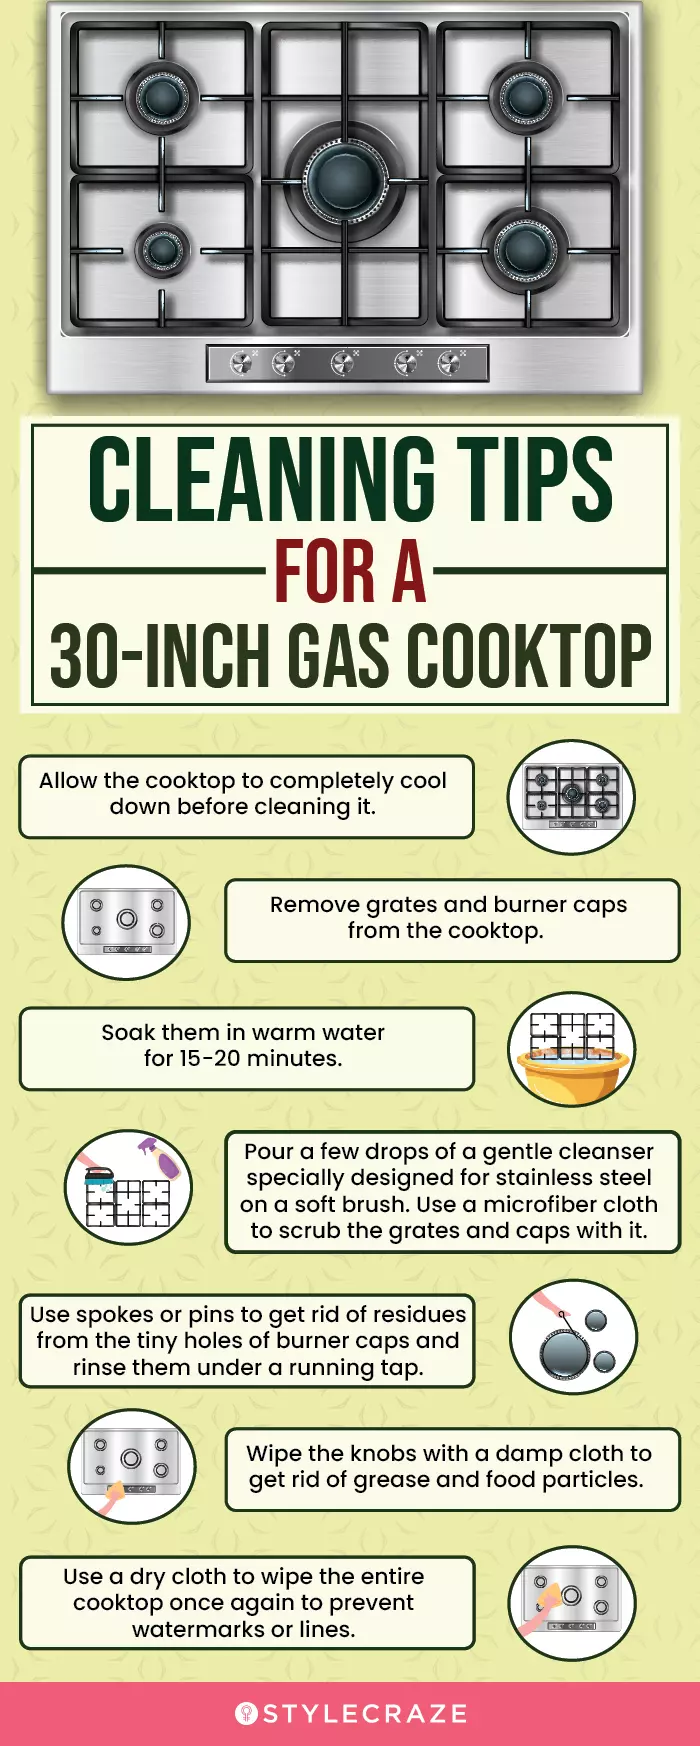 Cleaning Tips For A 30-Inch Gas Cooktop (infographic)